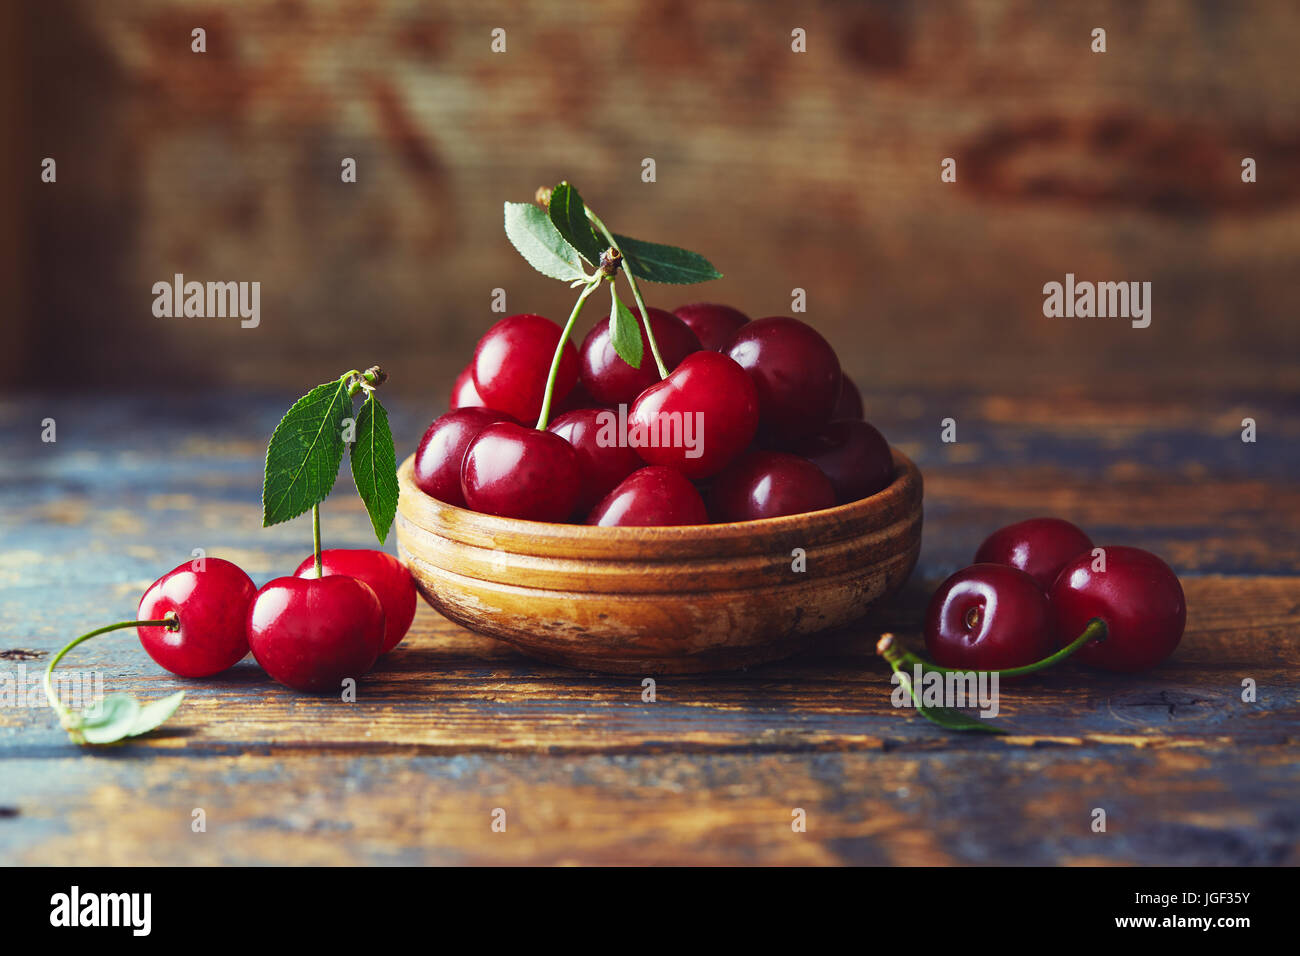 Cherries in a bowl on a wooden table. Freshly harvested cherries in a bowl on a wooden table. Stock Photo